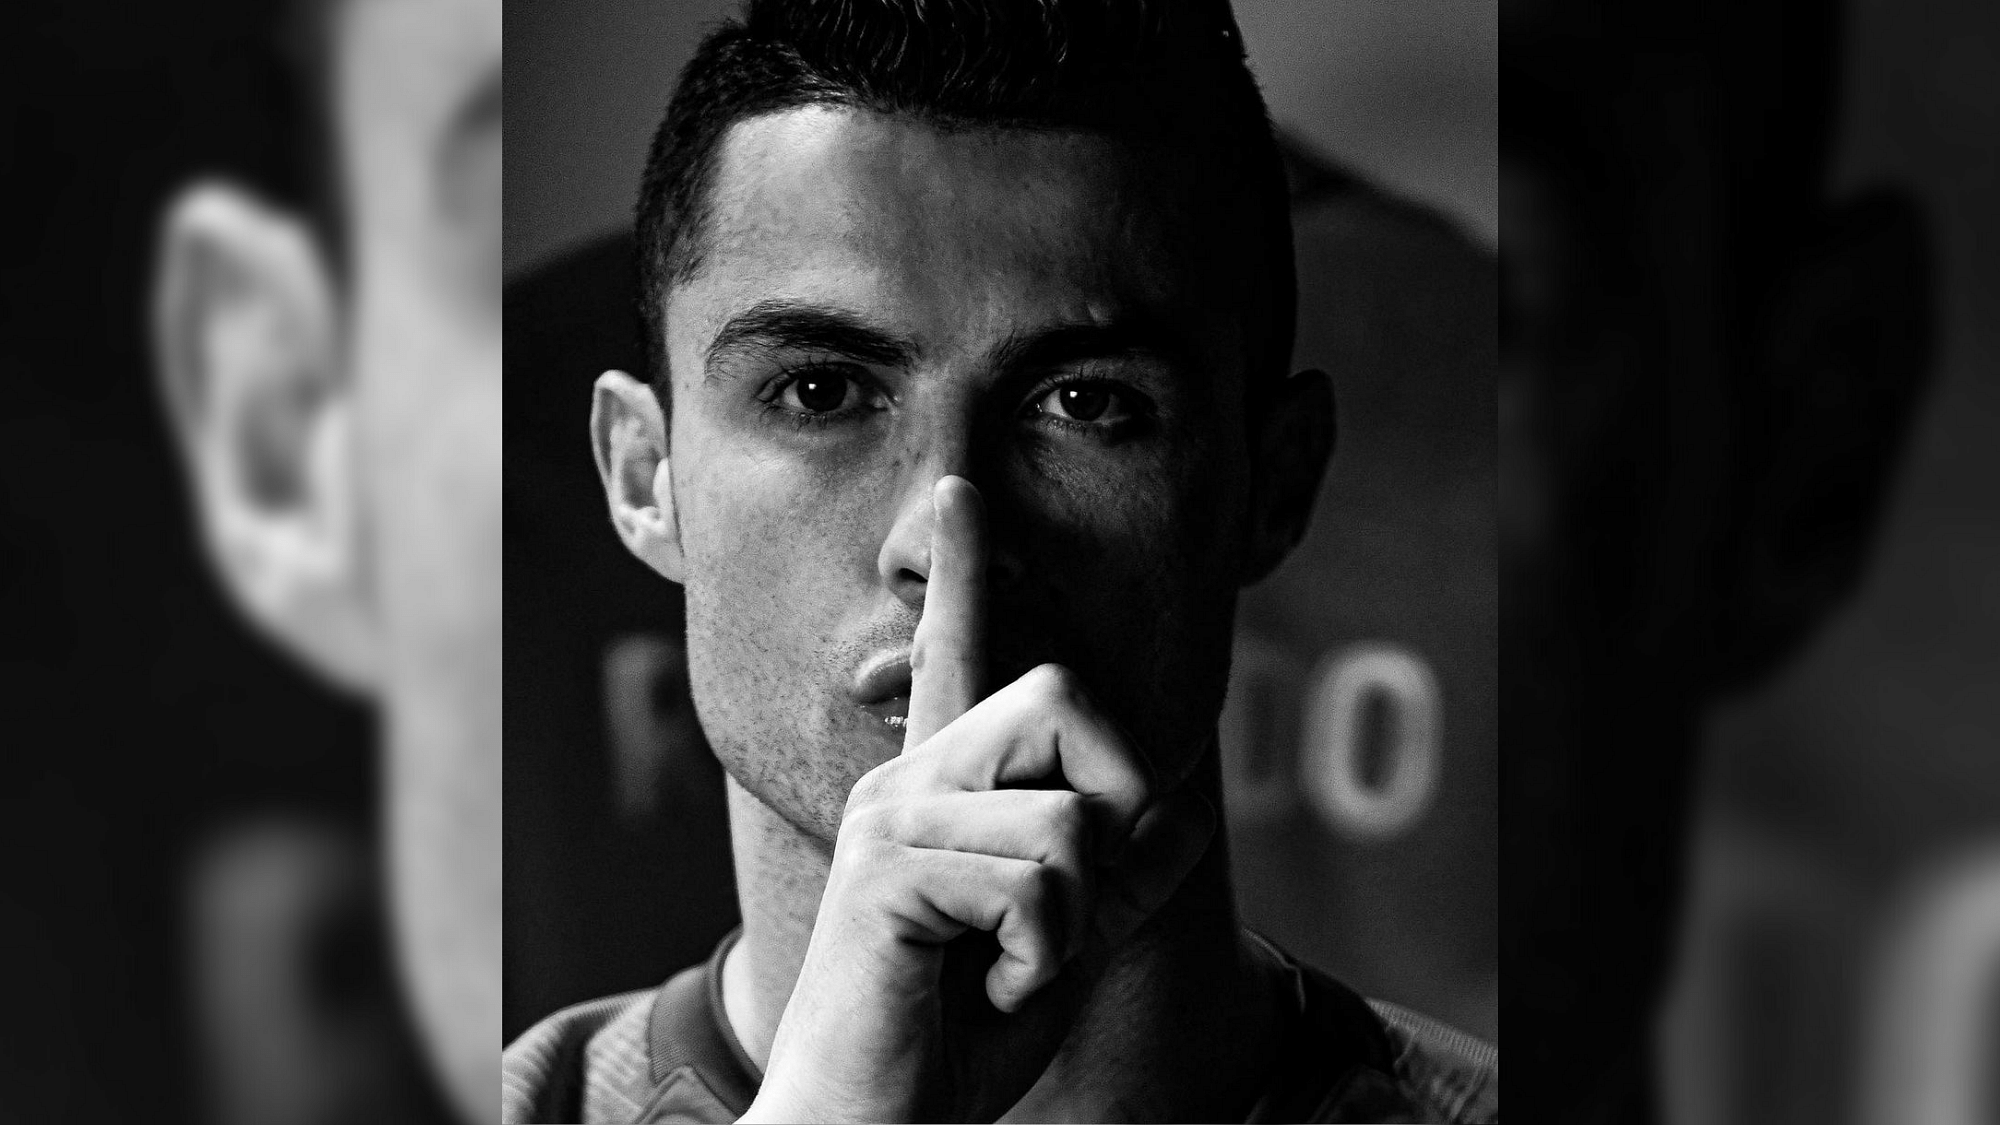 <div class="paragraphs"><p>Cristiano Ronaldo's achievements might overshadow some serious accusations against him, but they very much exist.</p></div>